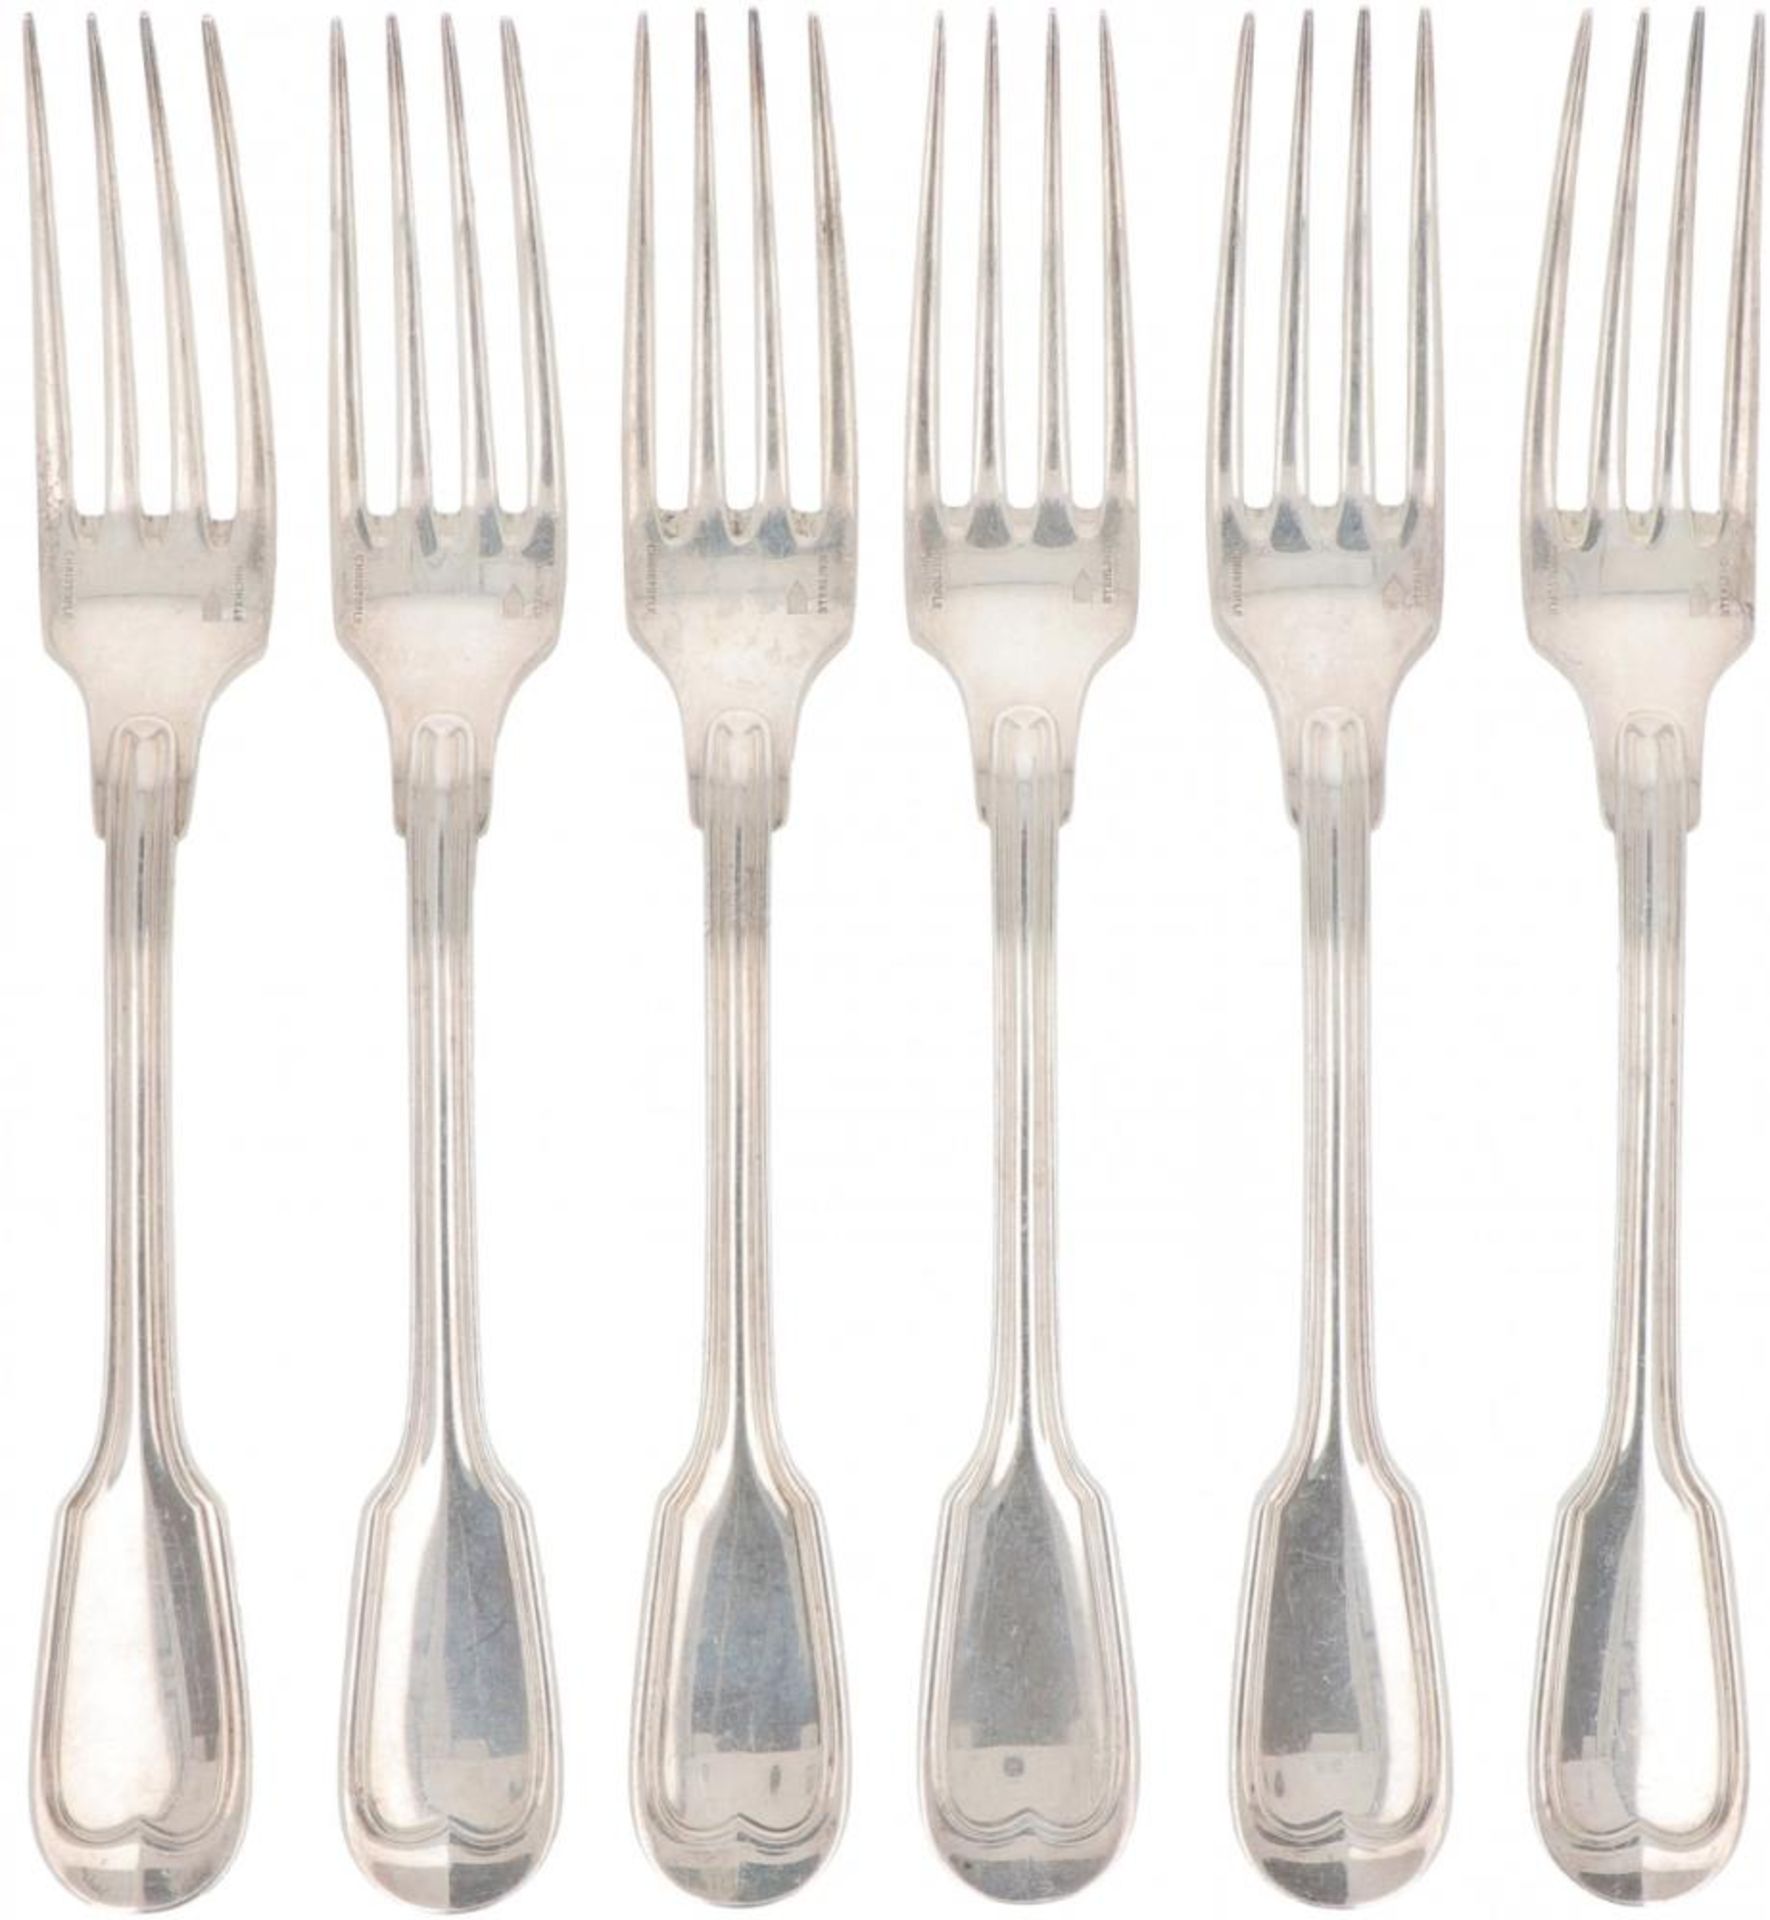 (6) piece set Christofle dinner forks model: "Chinon sterling" silver.